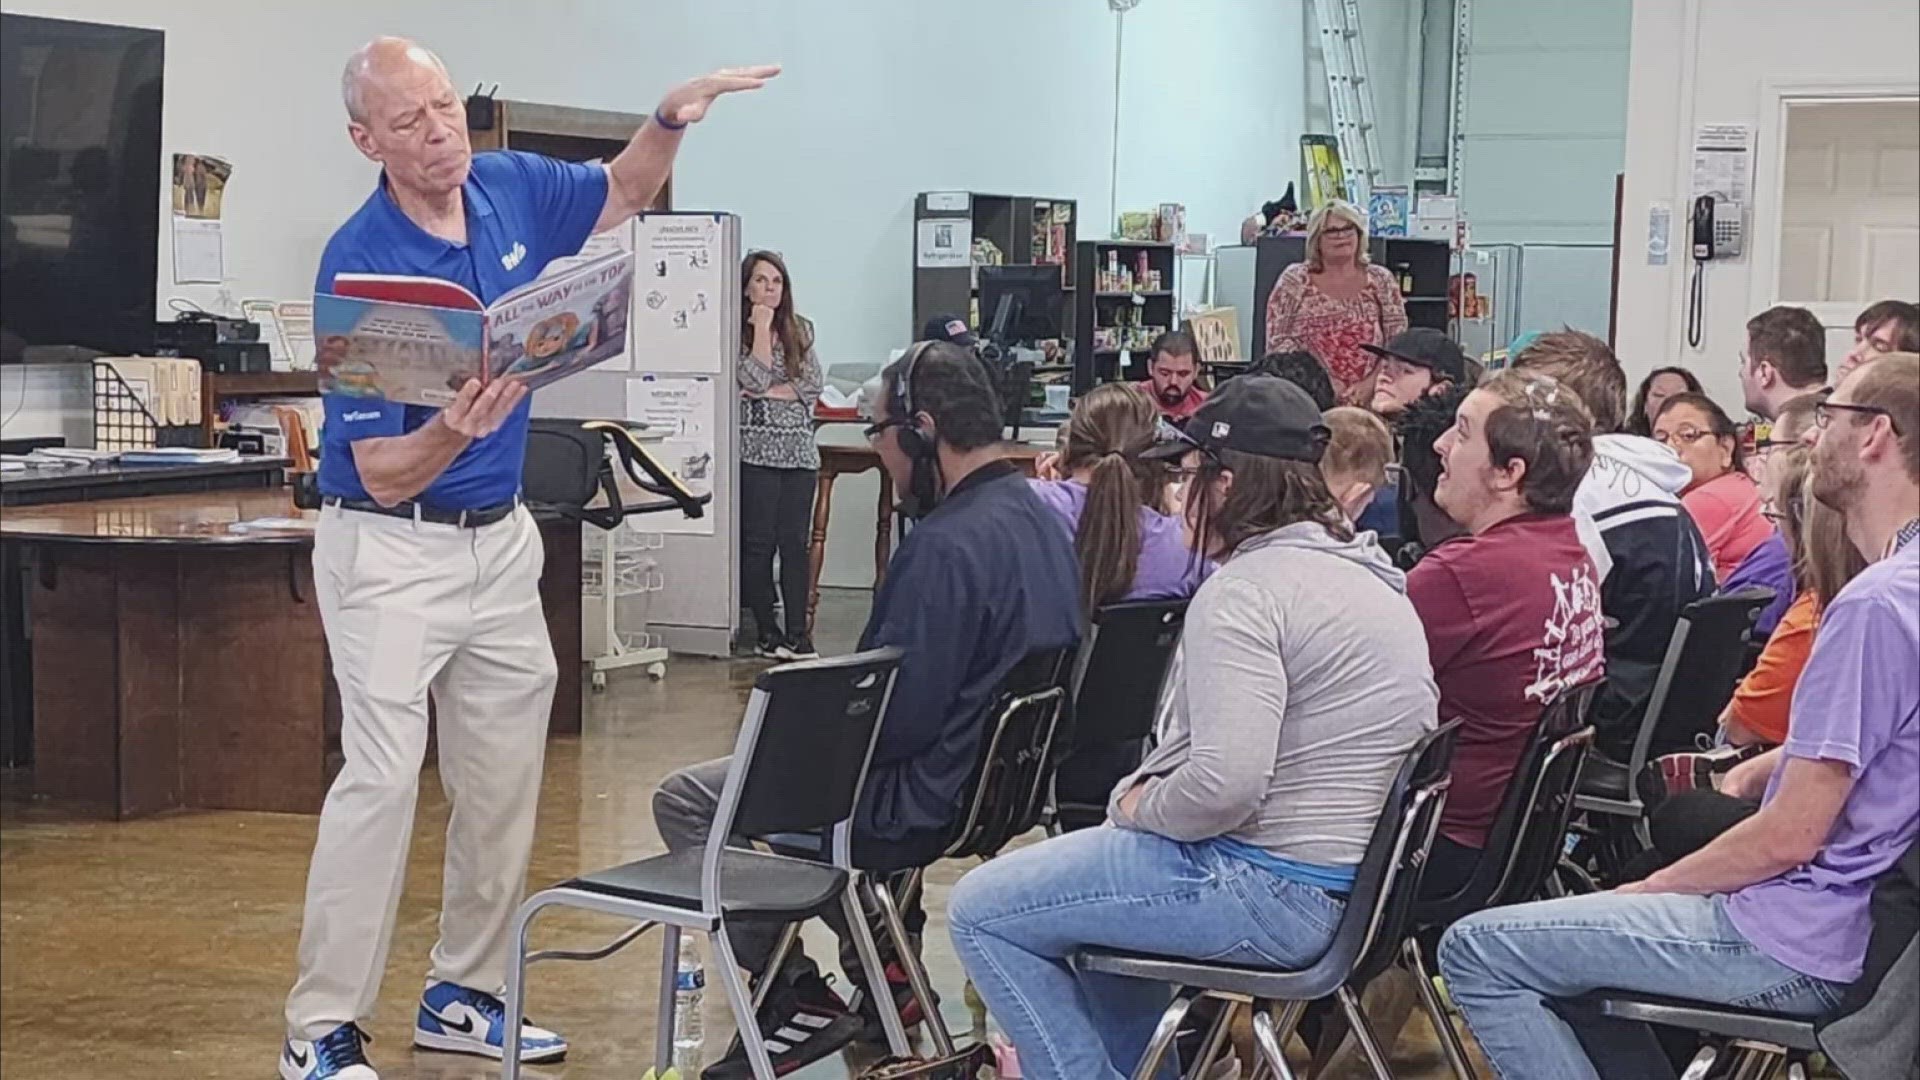 Craig O'Neill's Reading Roadtrip stopped at Abilities Unlimited of Hot Springs to tell the story that sparked the creation of the American Disabilities Act of 1990.